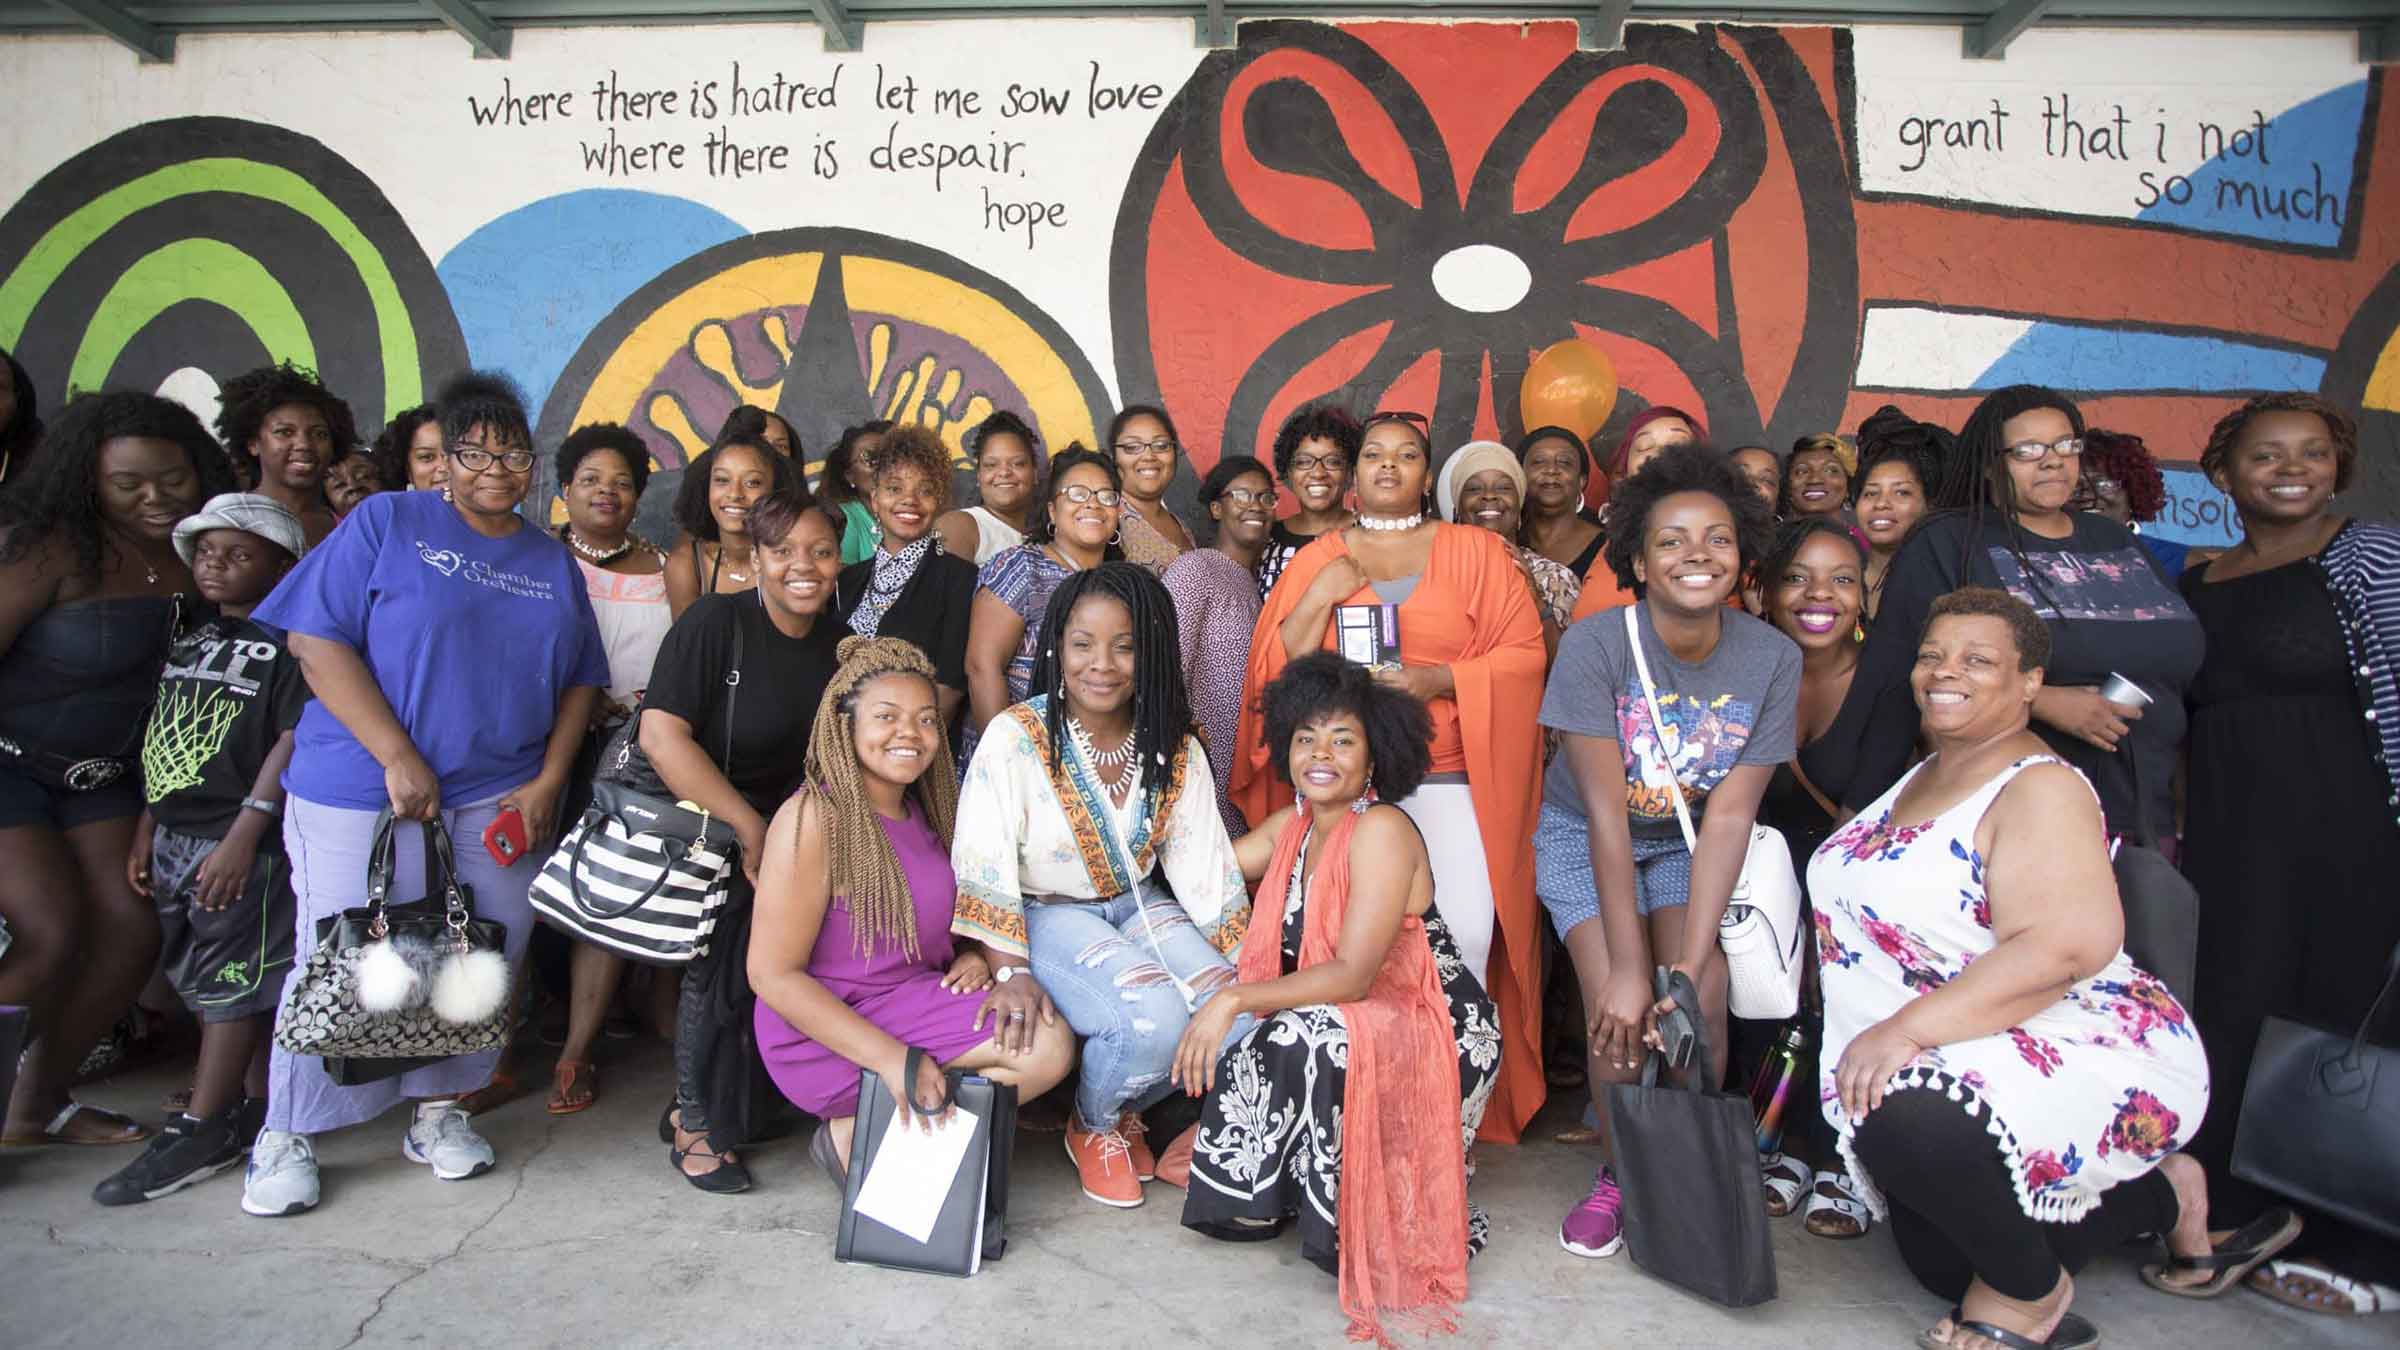 A group of Black women stand in front of a mural